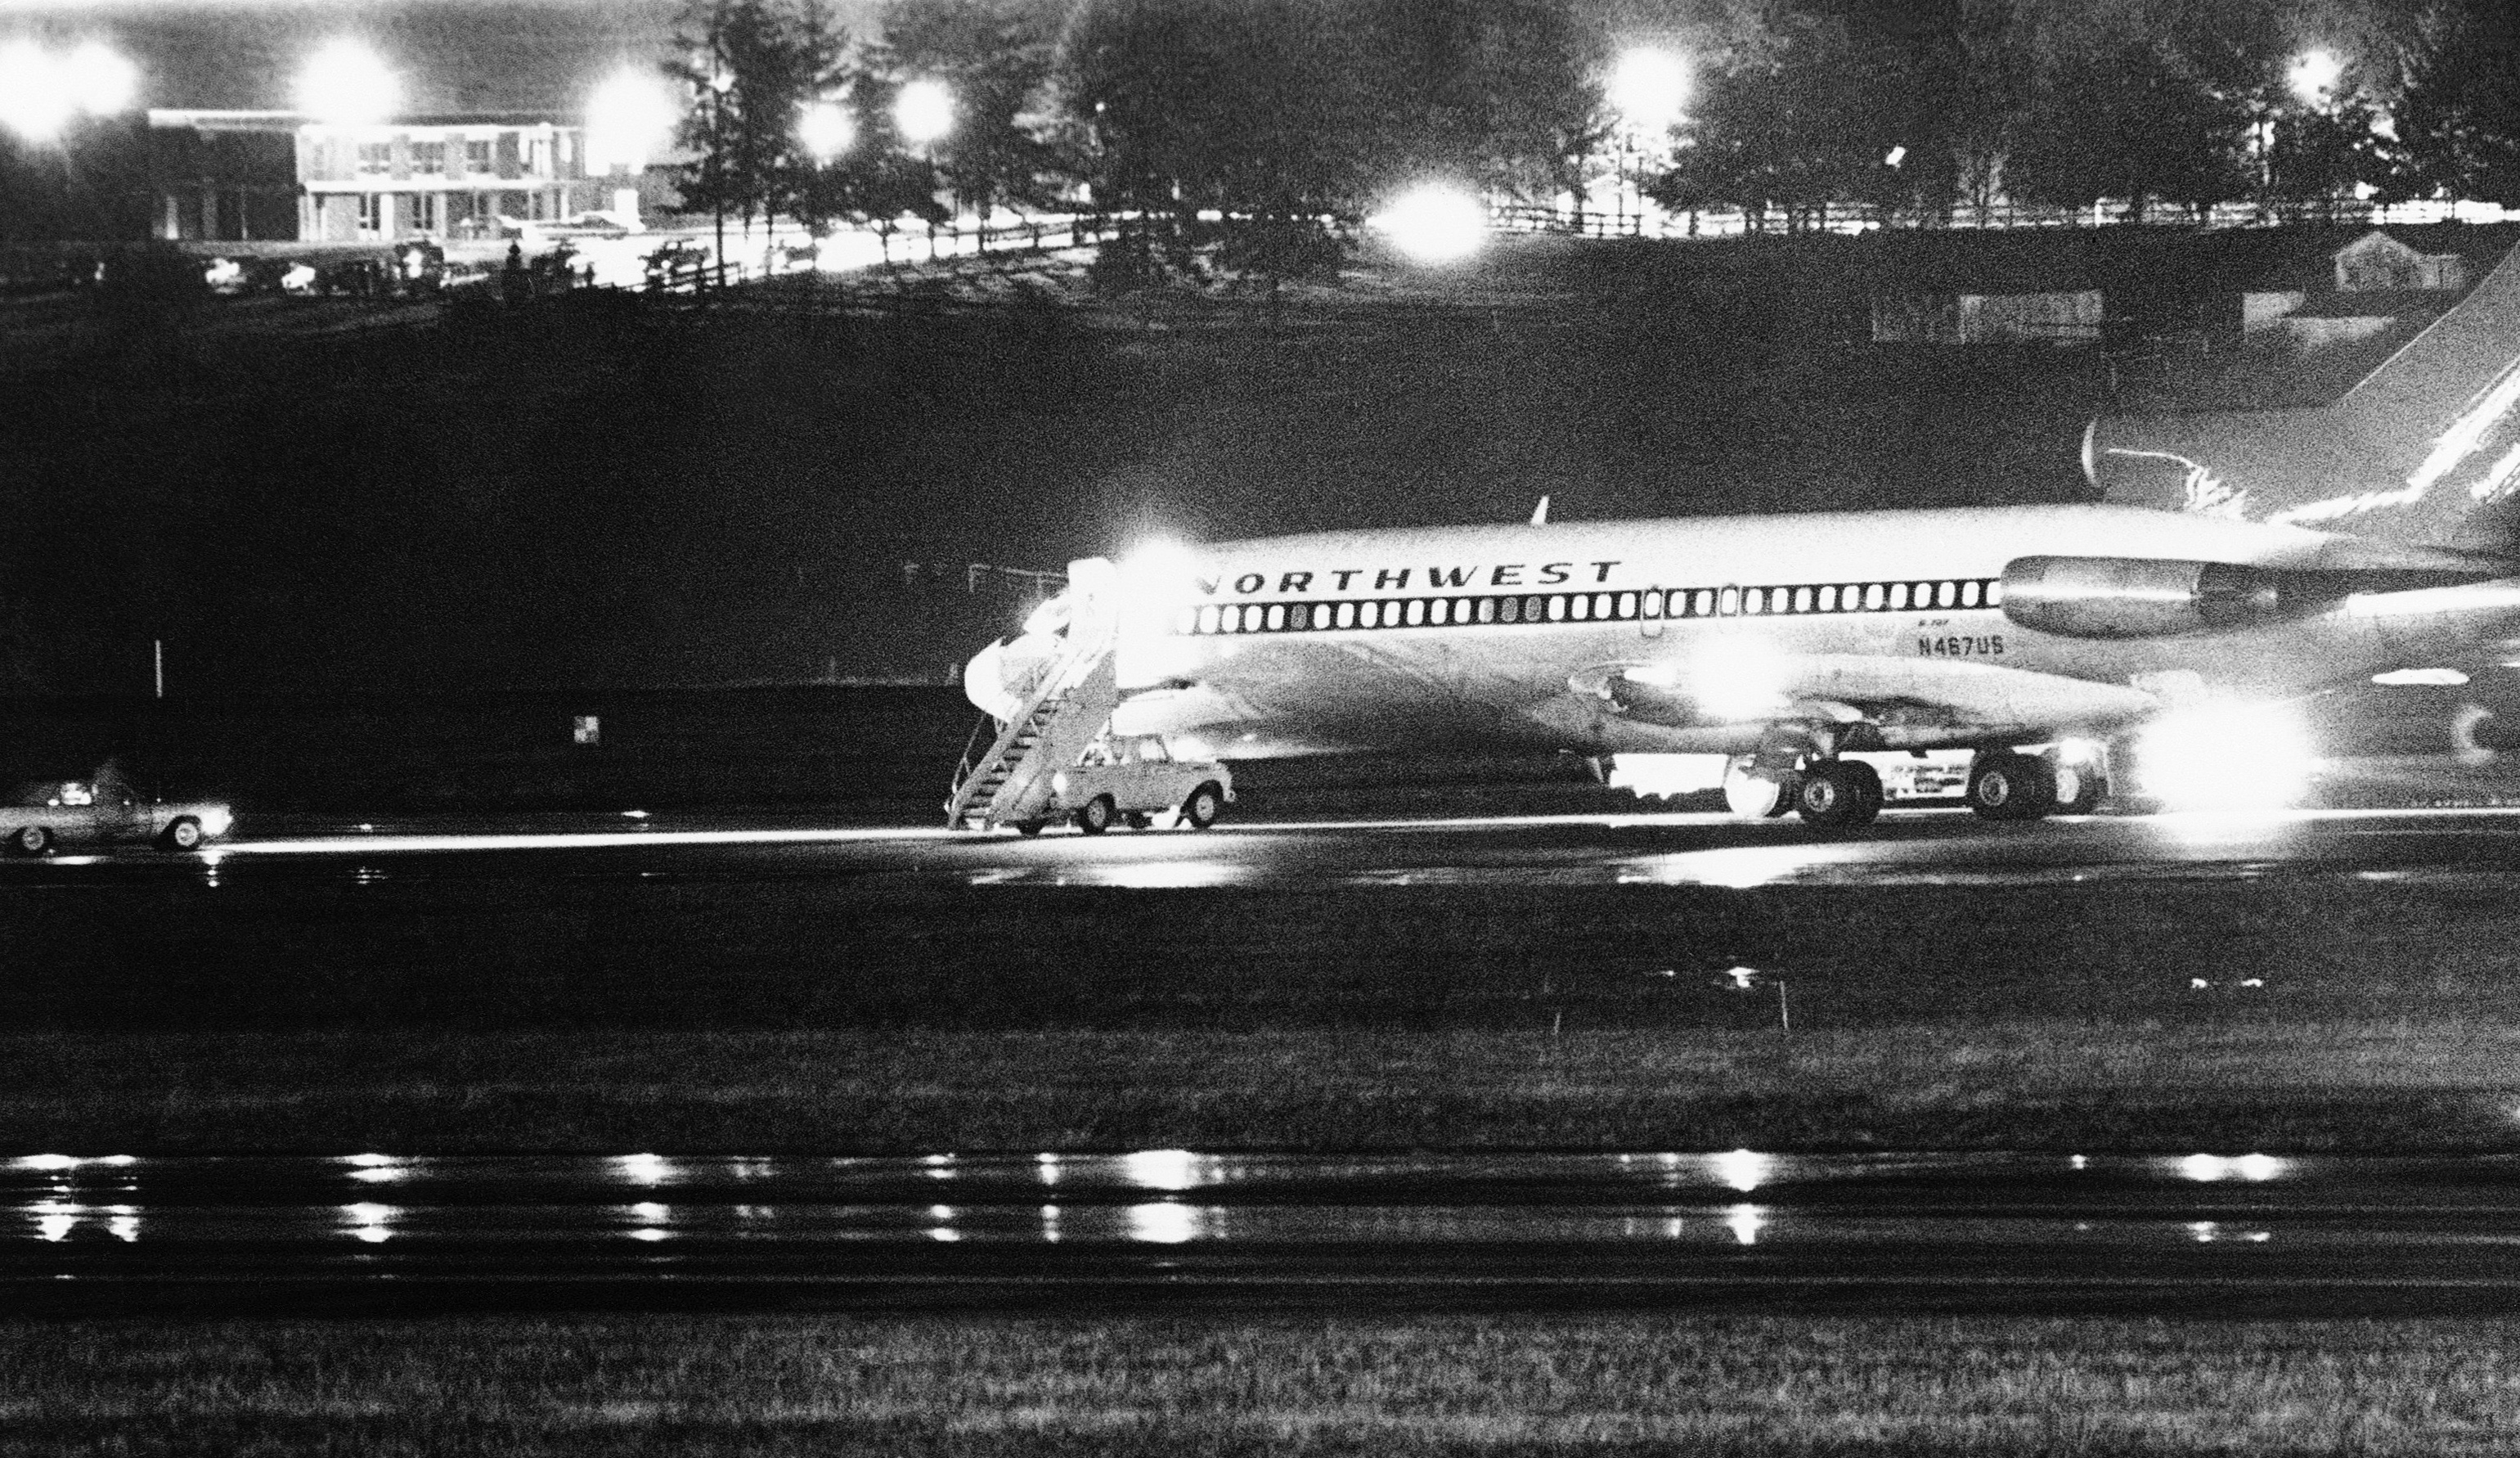 Cooper's hijacked Northwest Airlines jetliner is seen refueling at Seattle-Tacoma International Airport, November 25, 1971